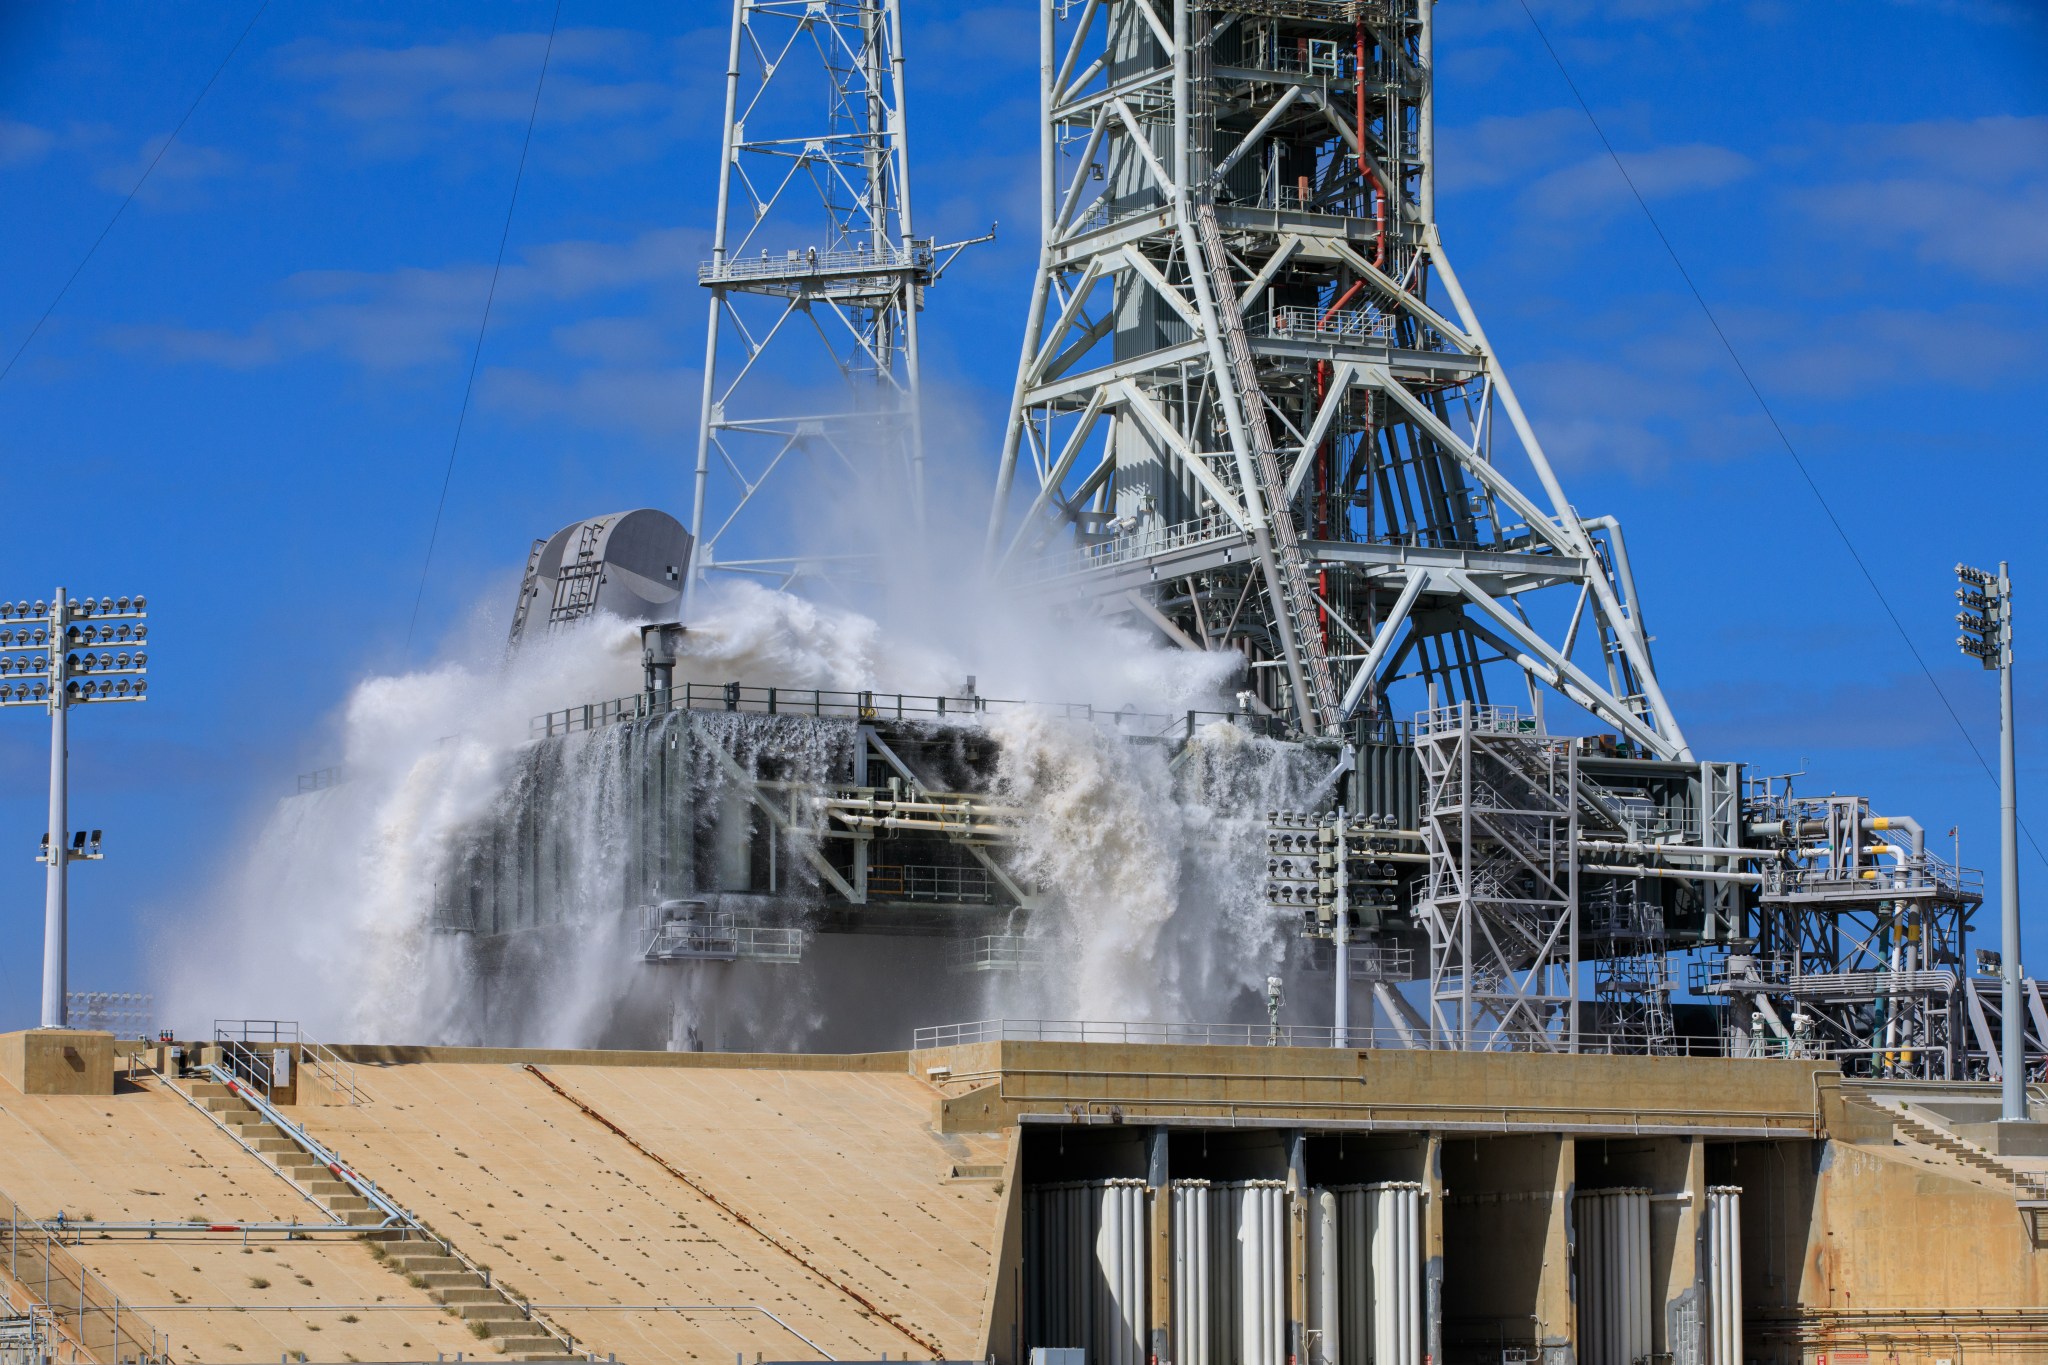 A large amount of water cascades over the edges of the gray mobile launcher at NASA's Kennedy Space Center. Droplets of water also spray up through the air, creating a mist.